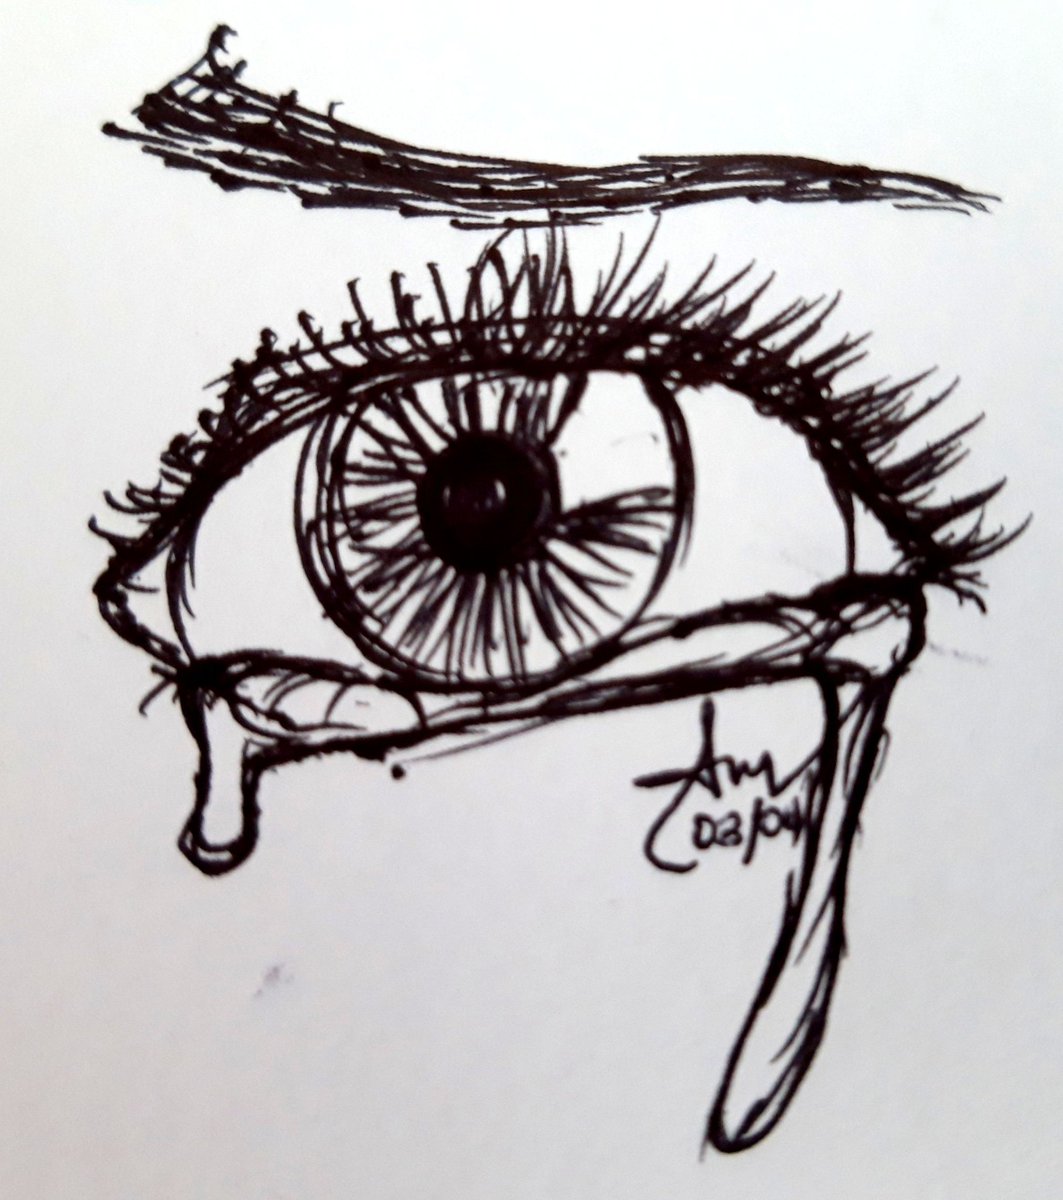 (1) Title: Eye CryDate Created: March 04, 2020